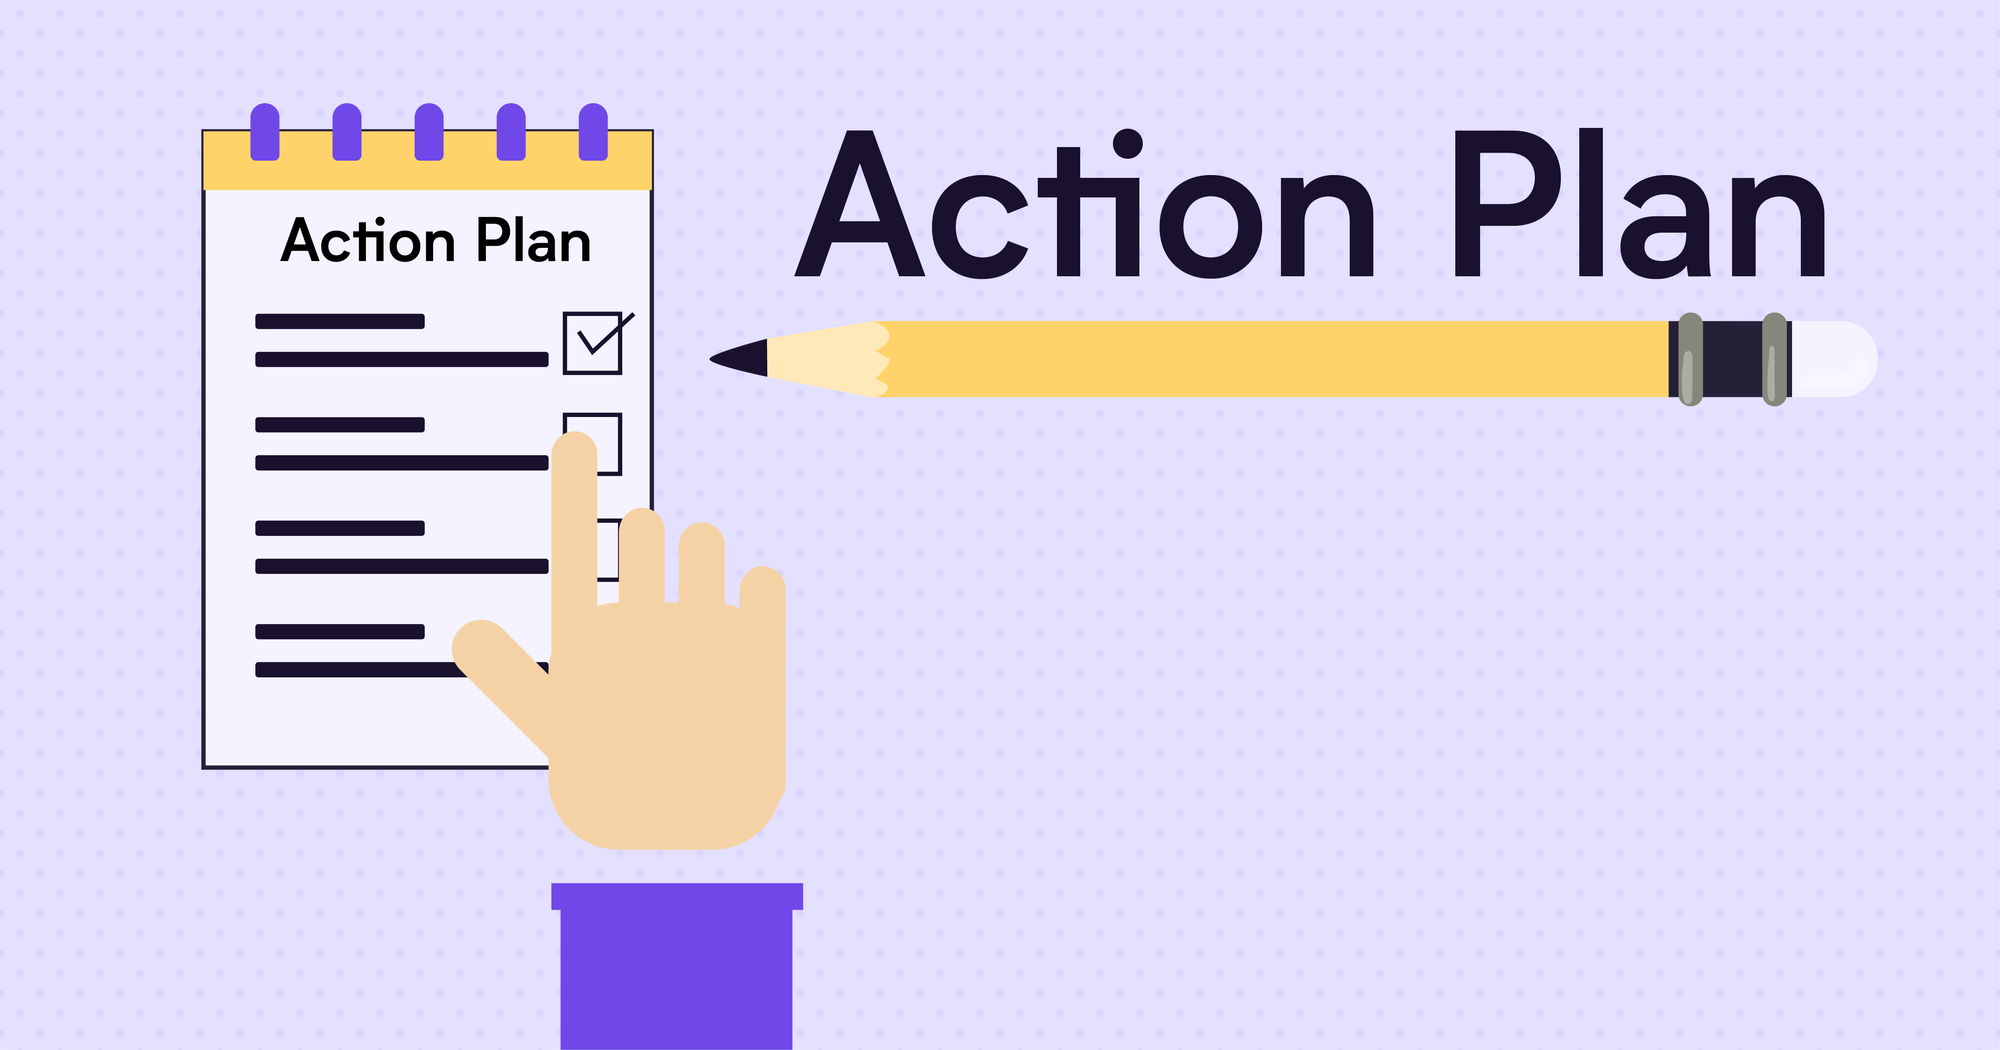 Discuss the action plan together